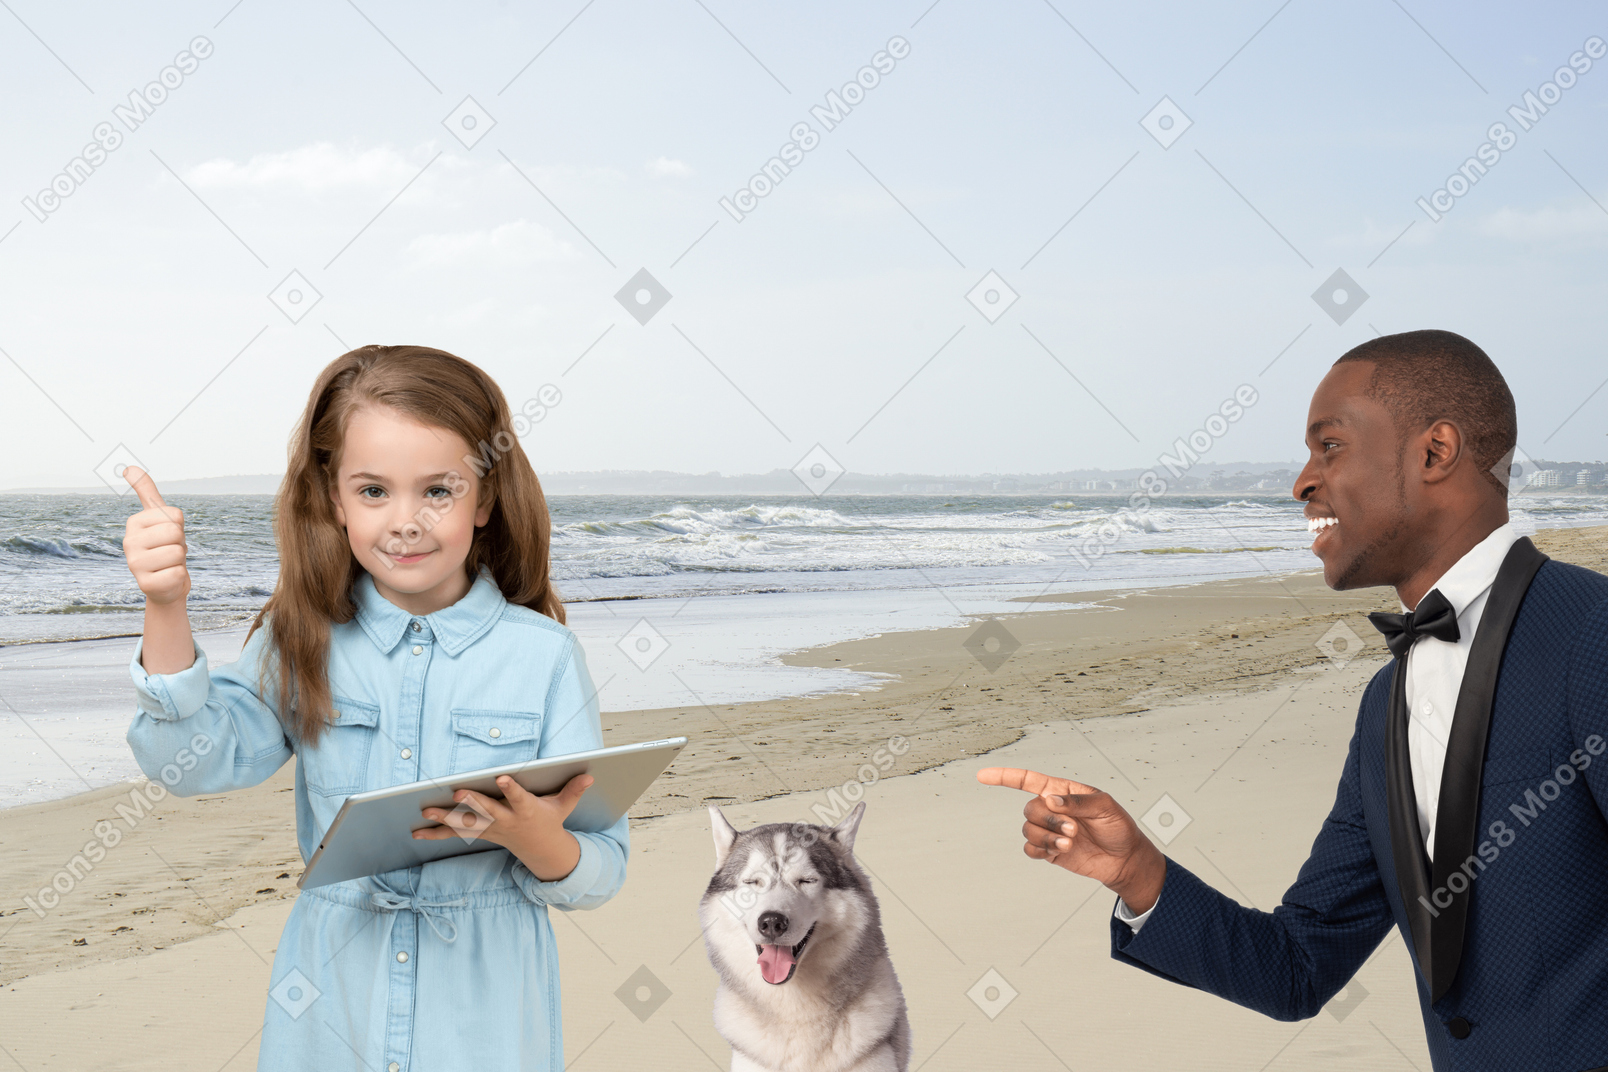 Person and groom holding hands on a beach